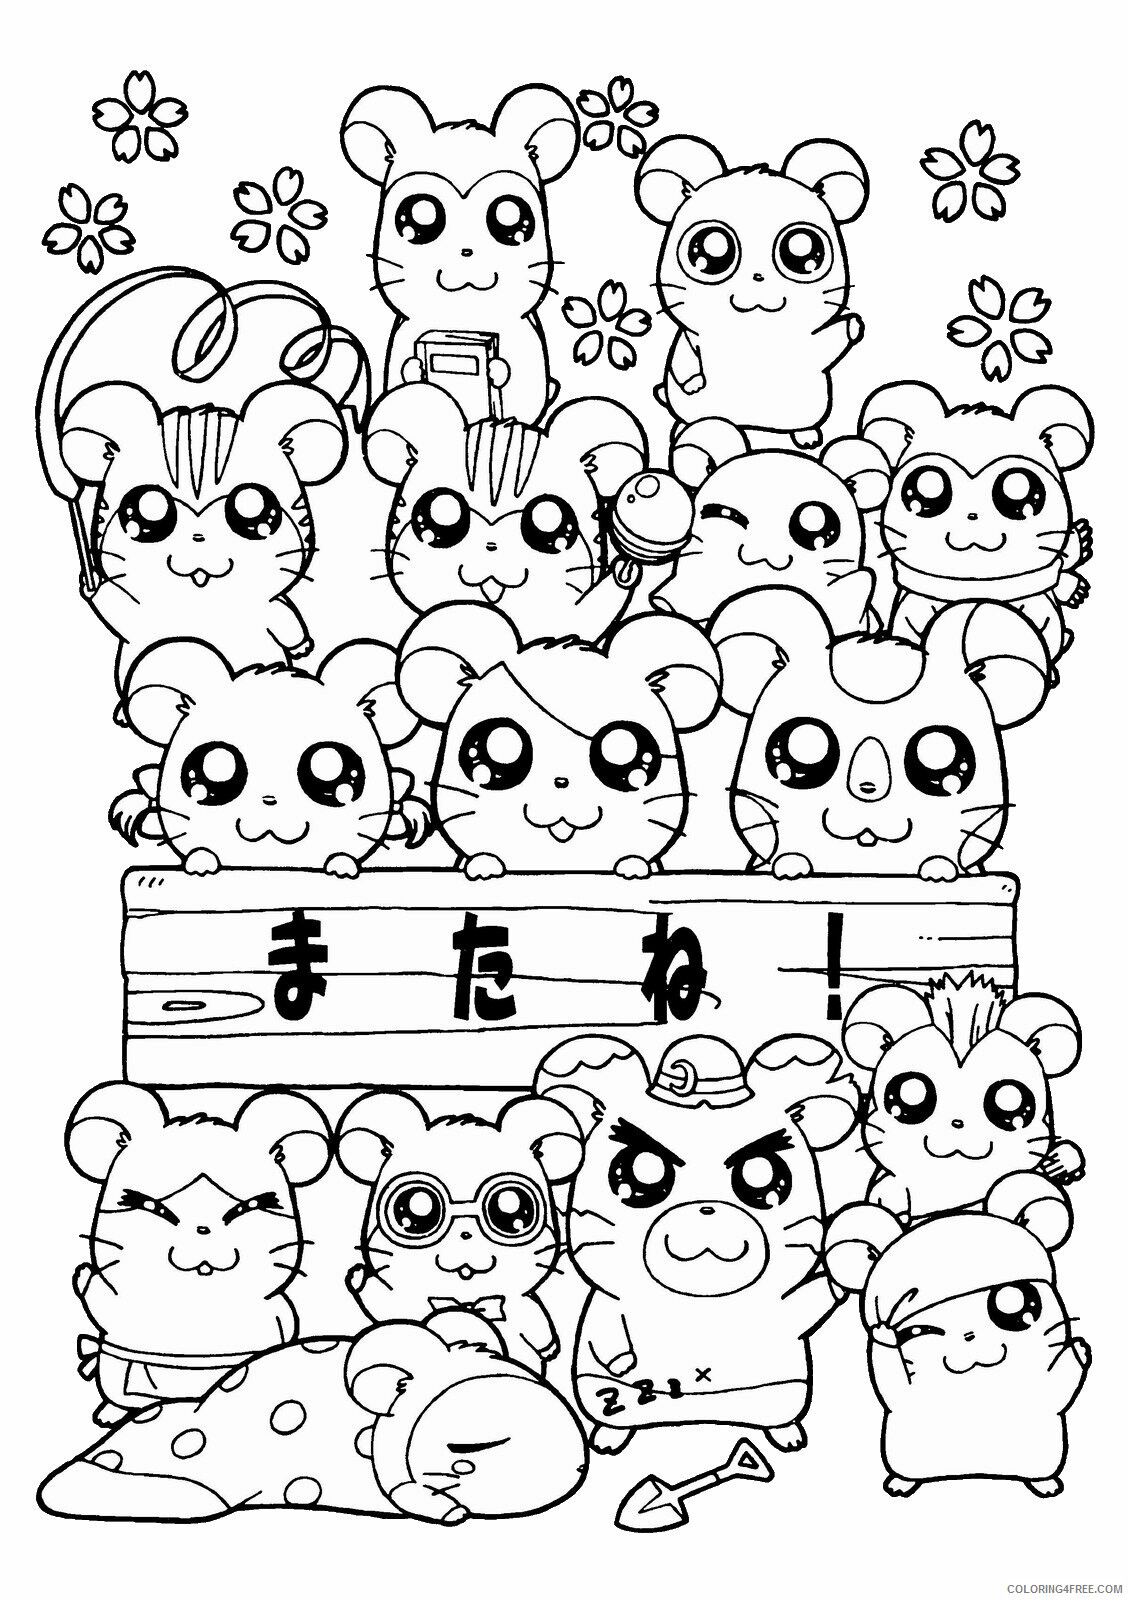 Hamtaro Printable Coloring Pages Anime hamtaro_coloring13 2021 0542 Coloring4free